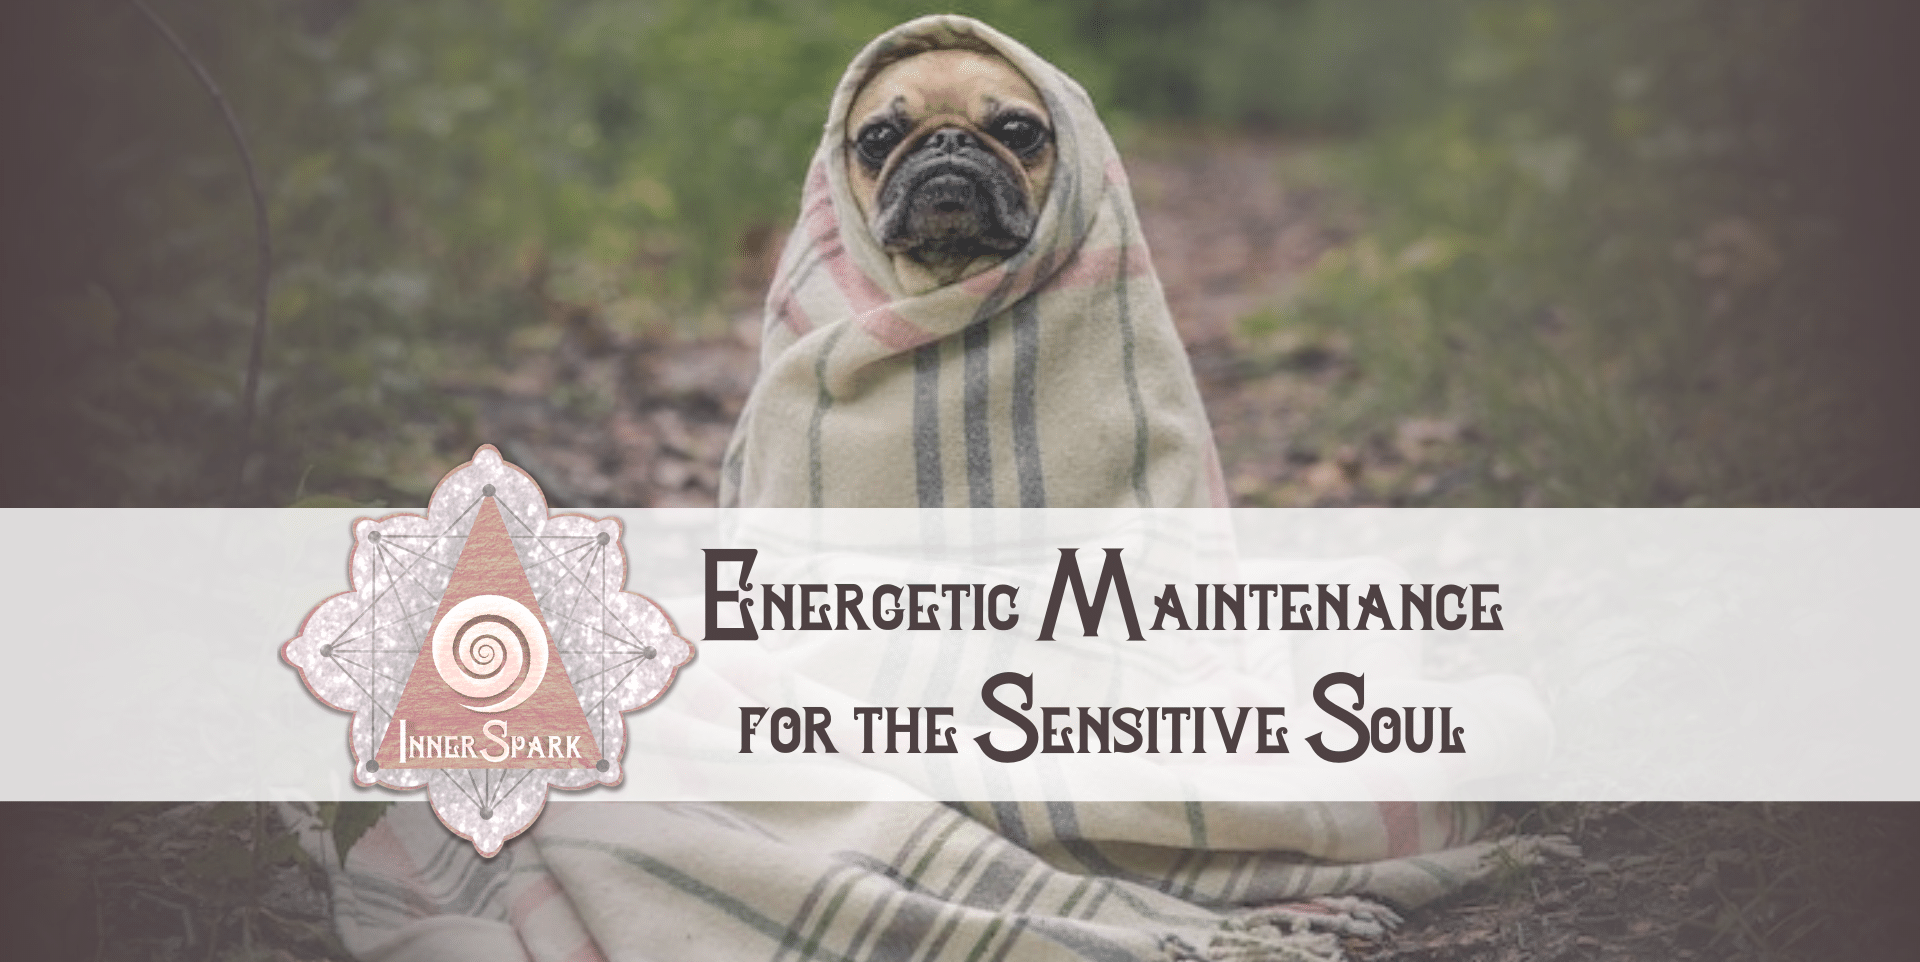 Energetic Maintenance for the Sensitive Soul